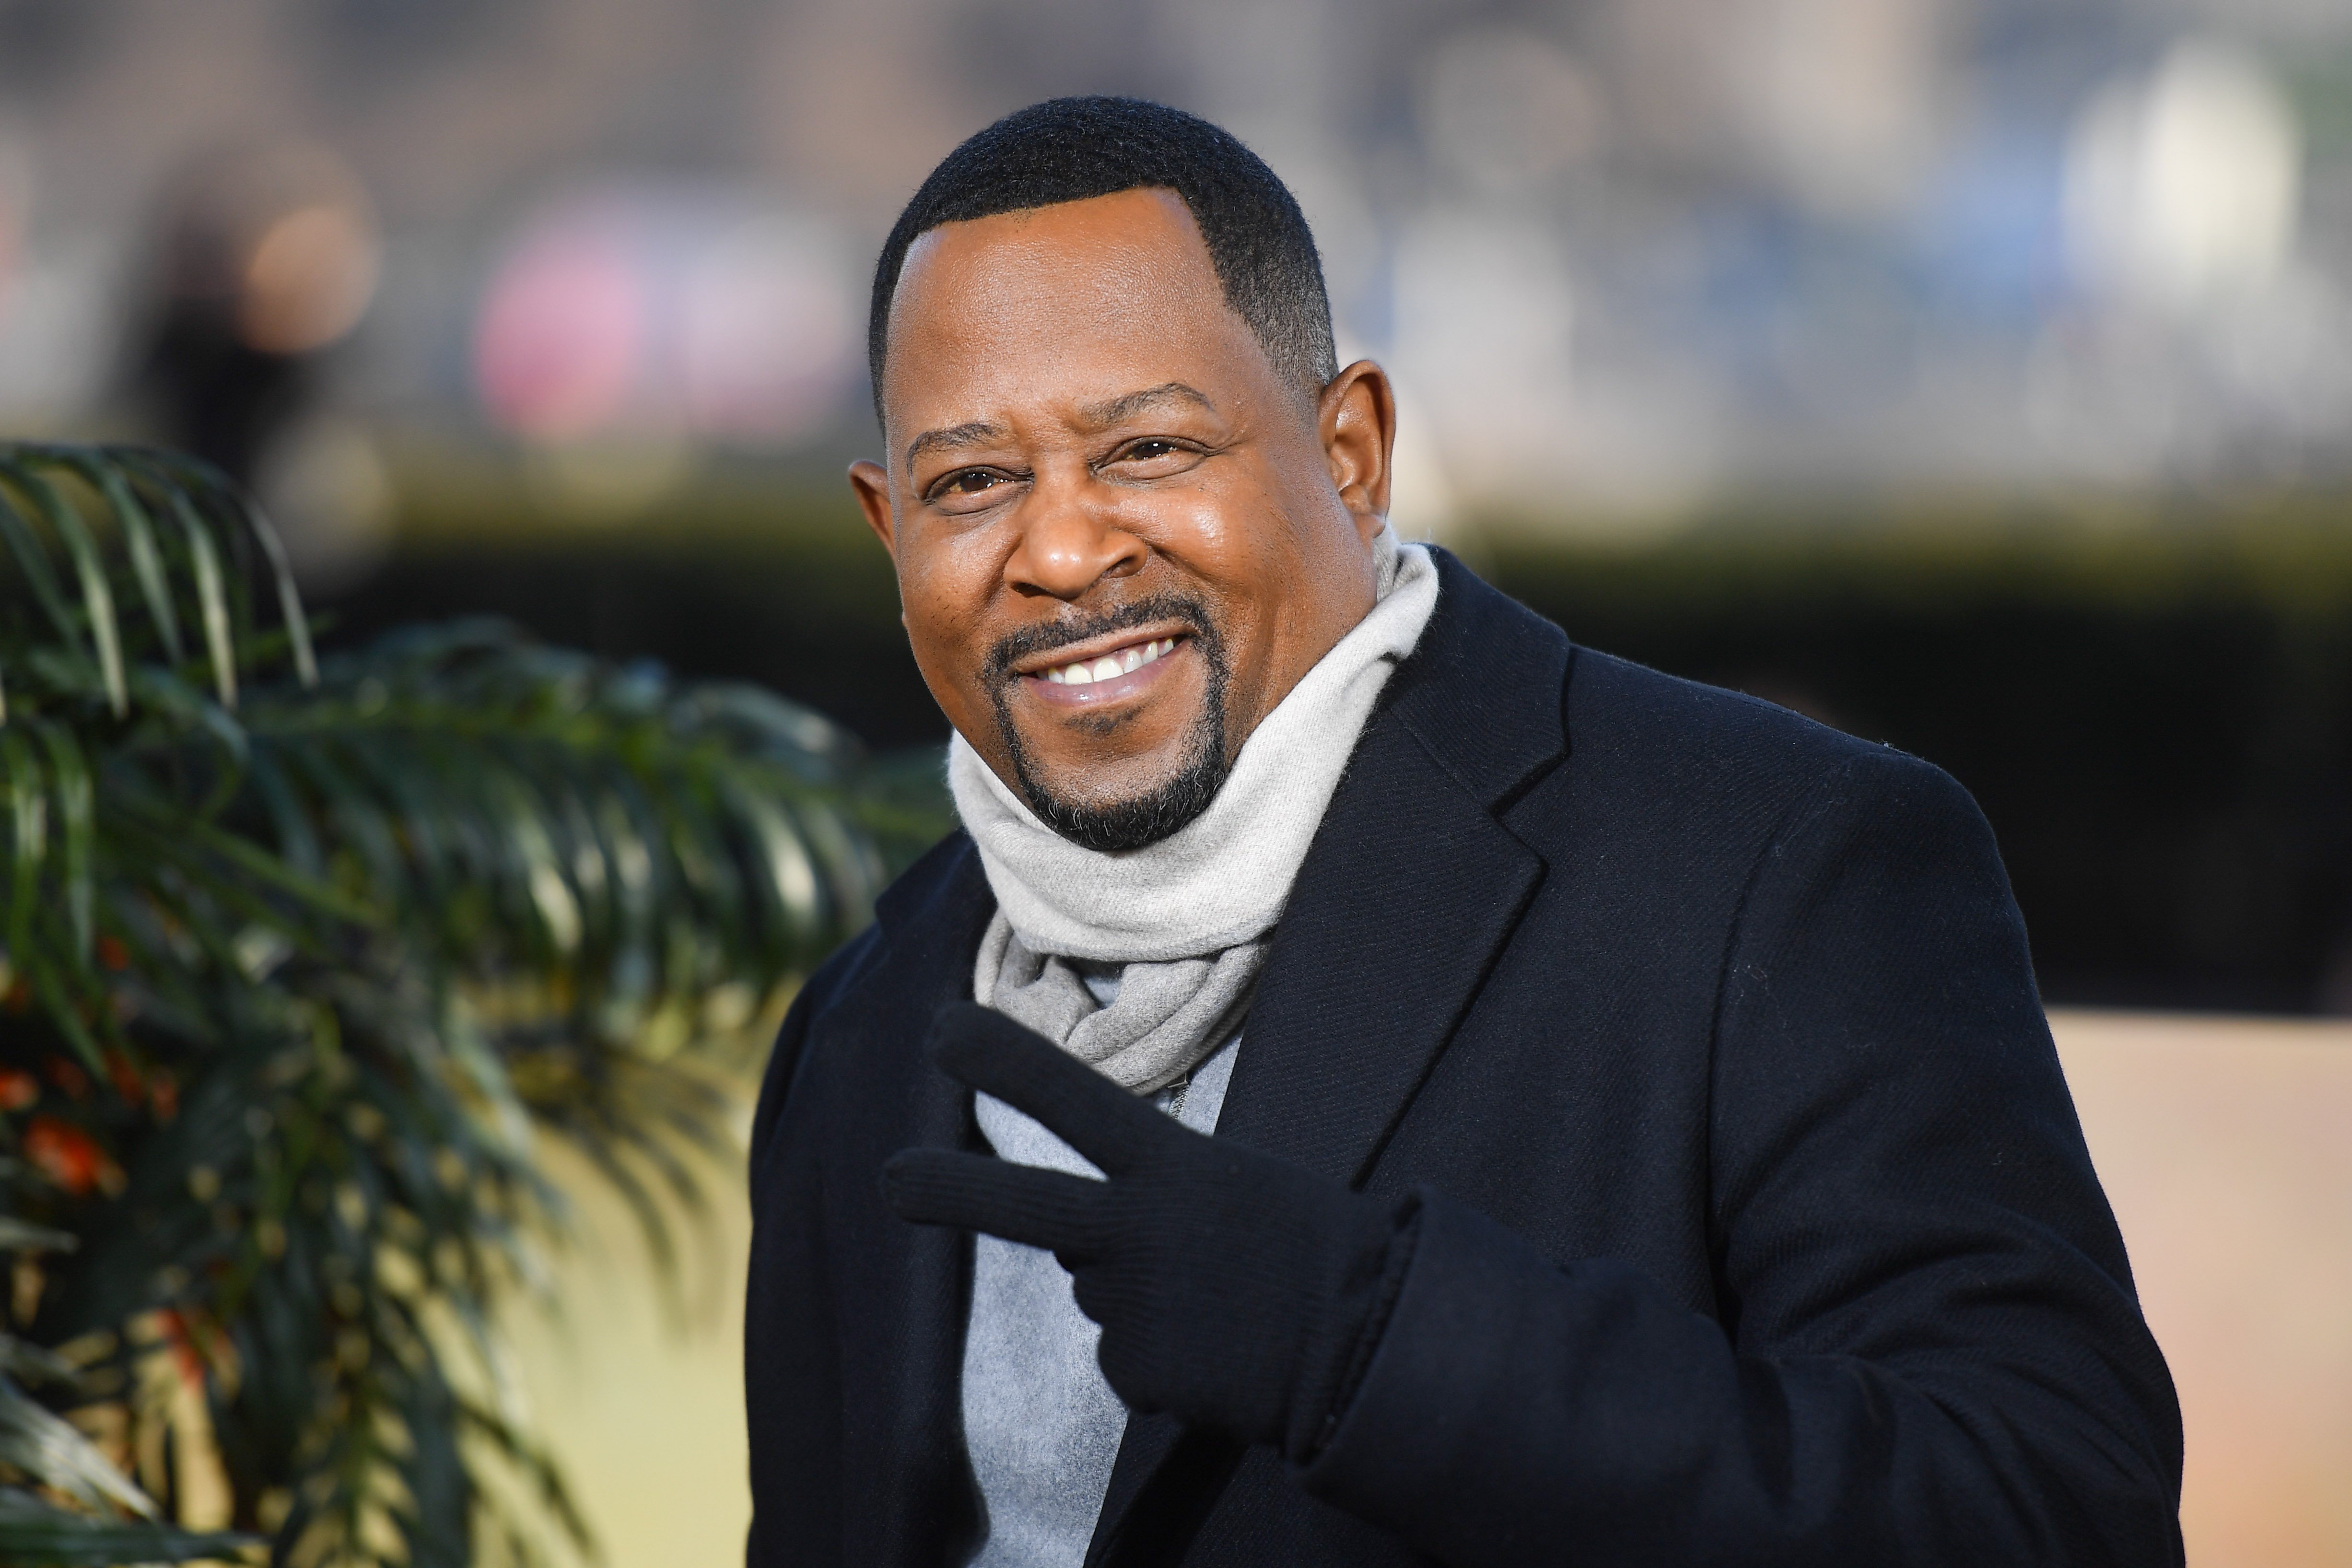 Martin Lawrence at a photocall for  "Bad Boys For Life" on January 06, 2020 in Paris, France. | Source: Getty Images